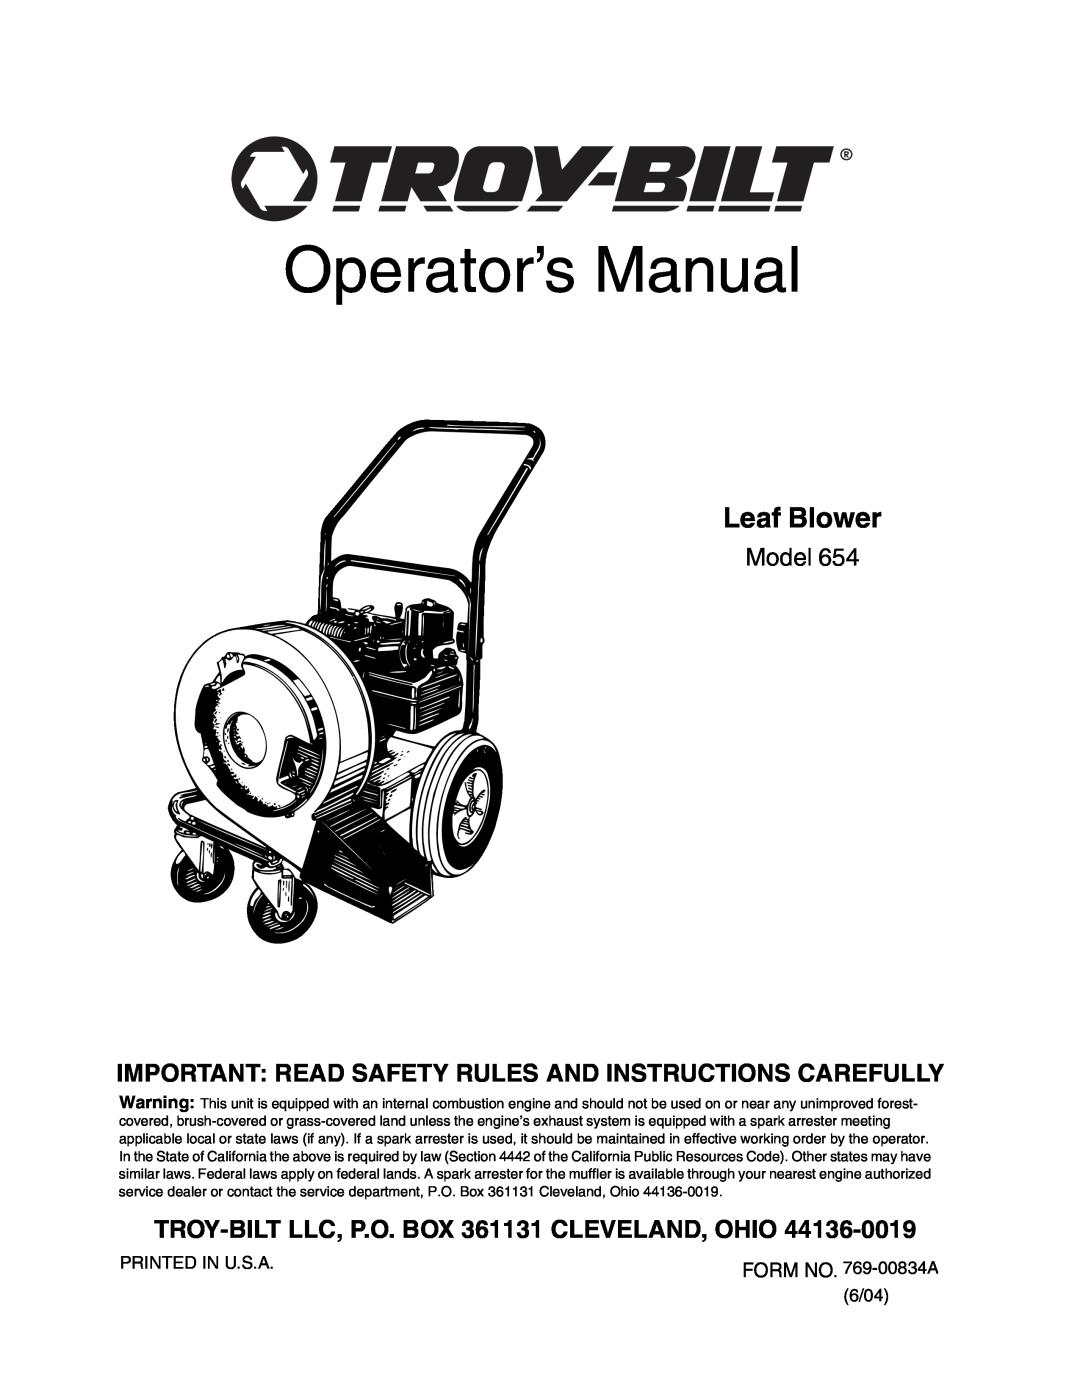 Troy-Bilt 654 manual Operator’s Manual, Leaf Blower, Model, Important Read Safety Rules And Instructions Carefully 